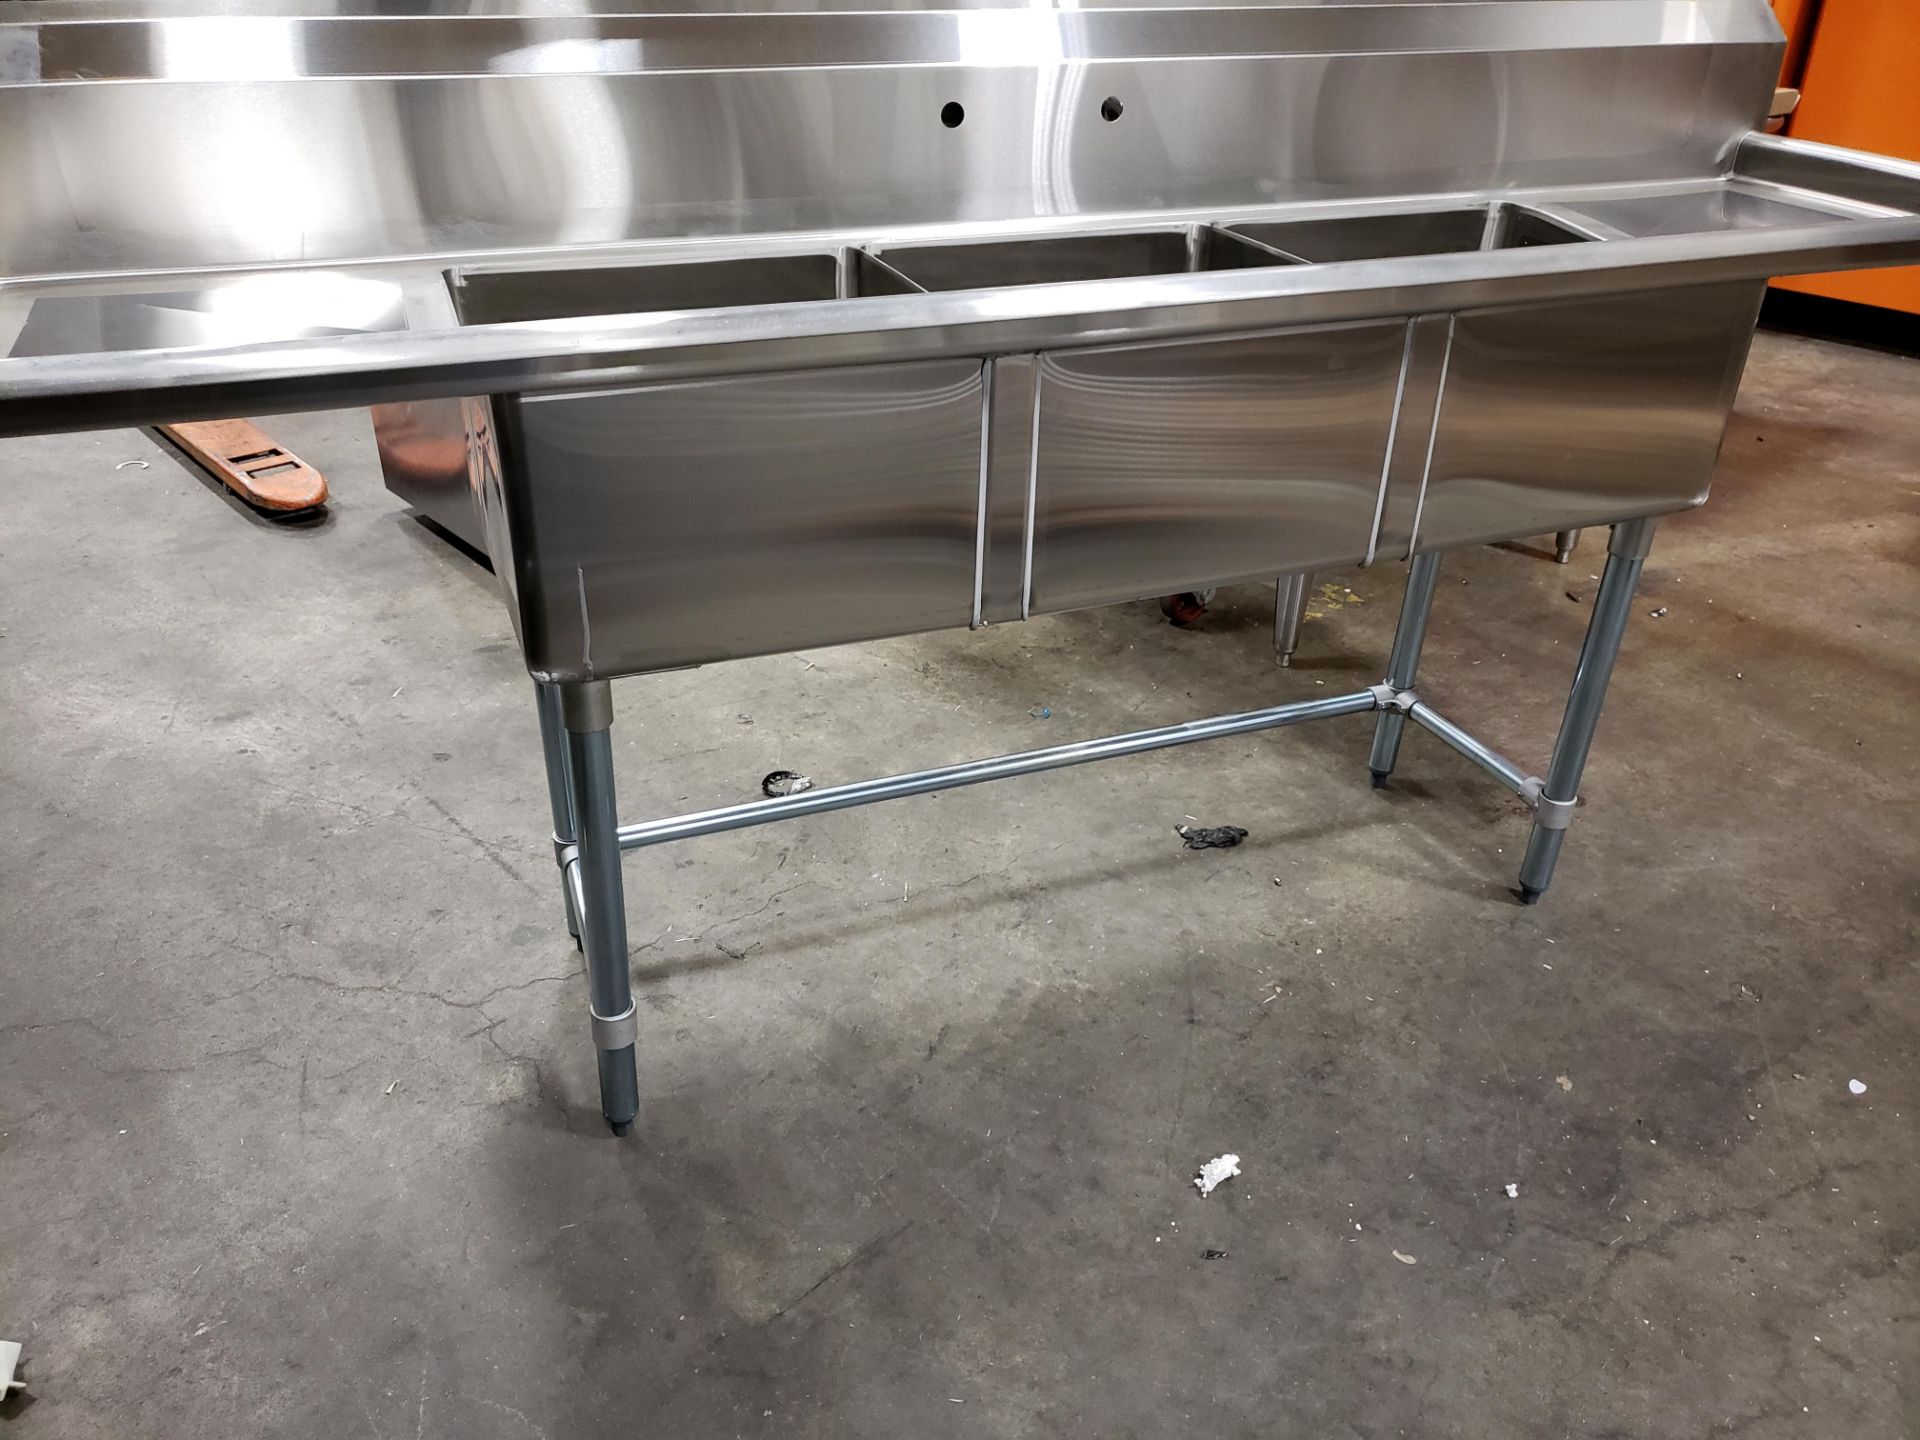 Corner Drain Triple Two Drainboard Sink, Overall Dims 90” x 23.5” x 44” - Image 3 of 4